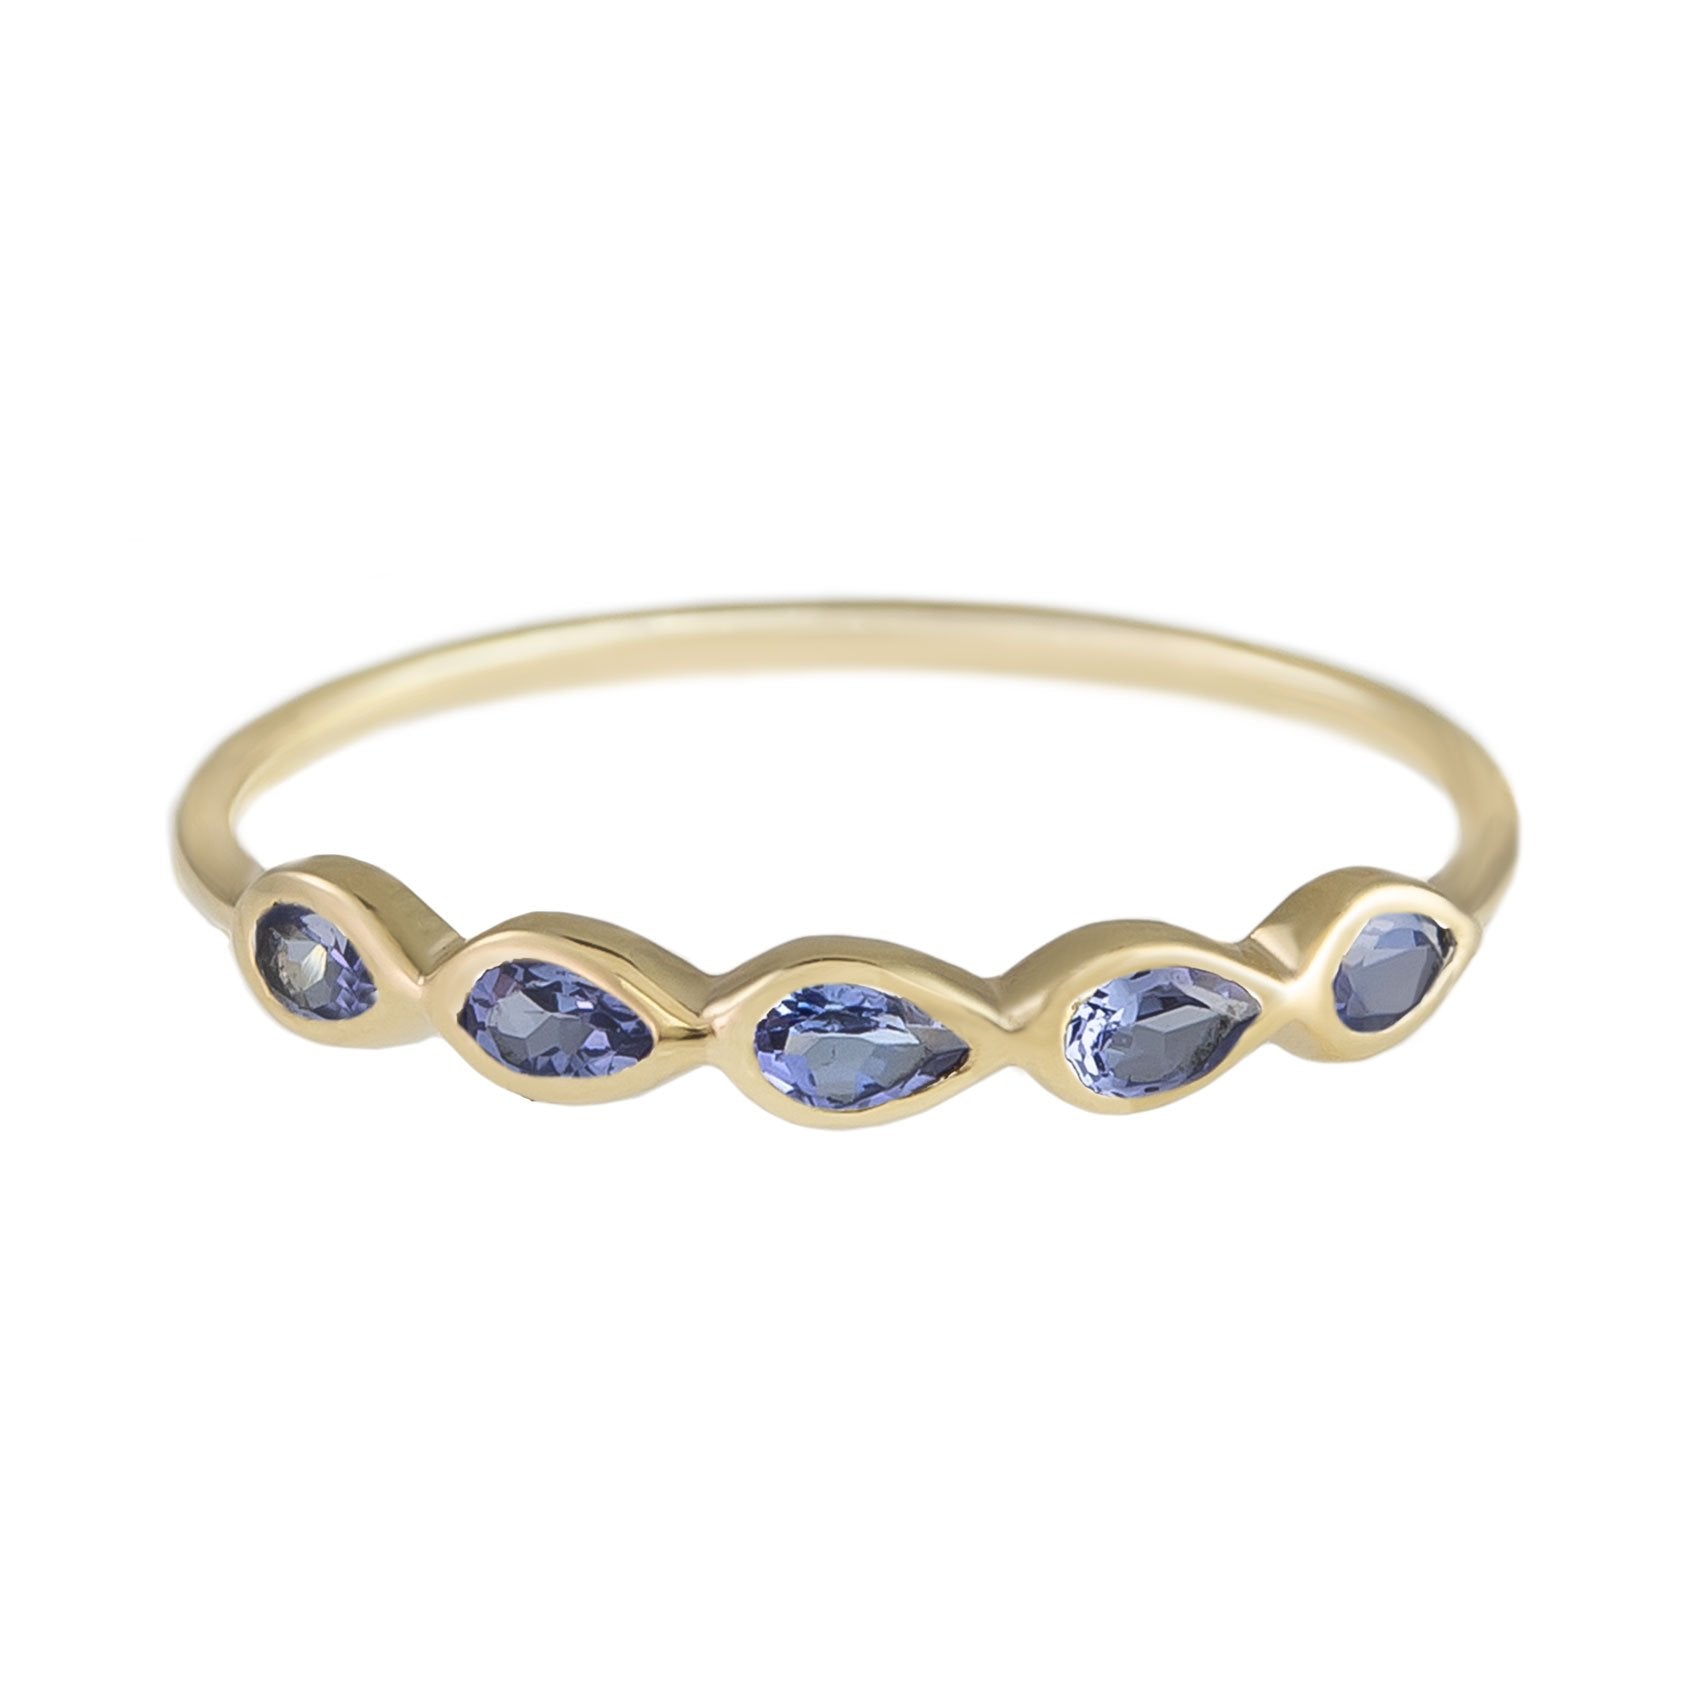 Metier by tomfoolery 5 Stone Tanzanite Ring in 9ct yellow gold with pear cut tanzanites